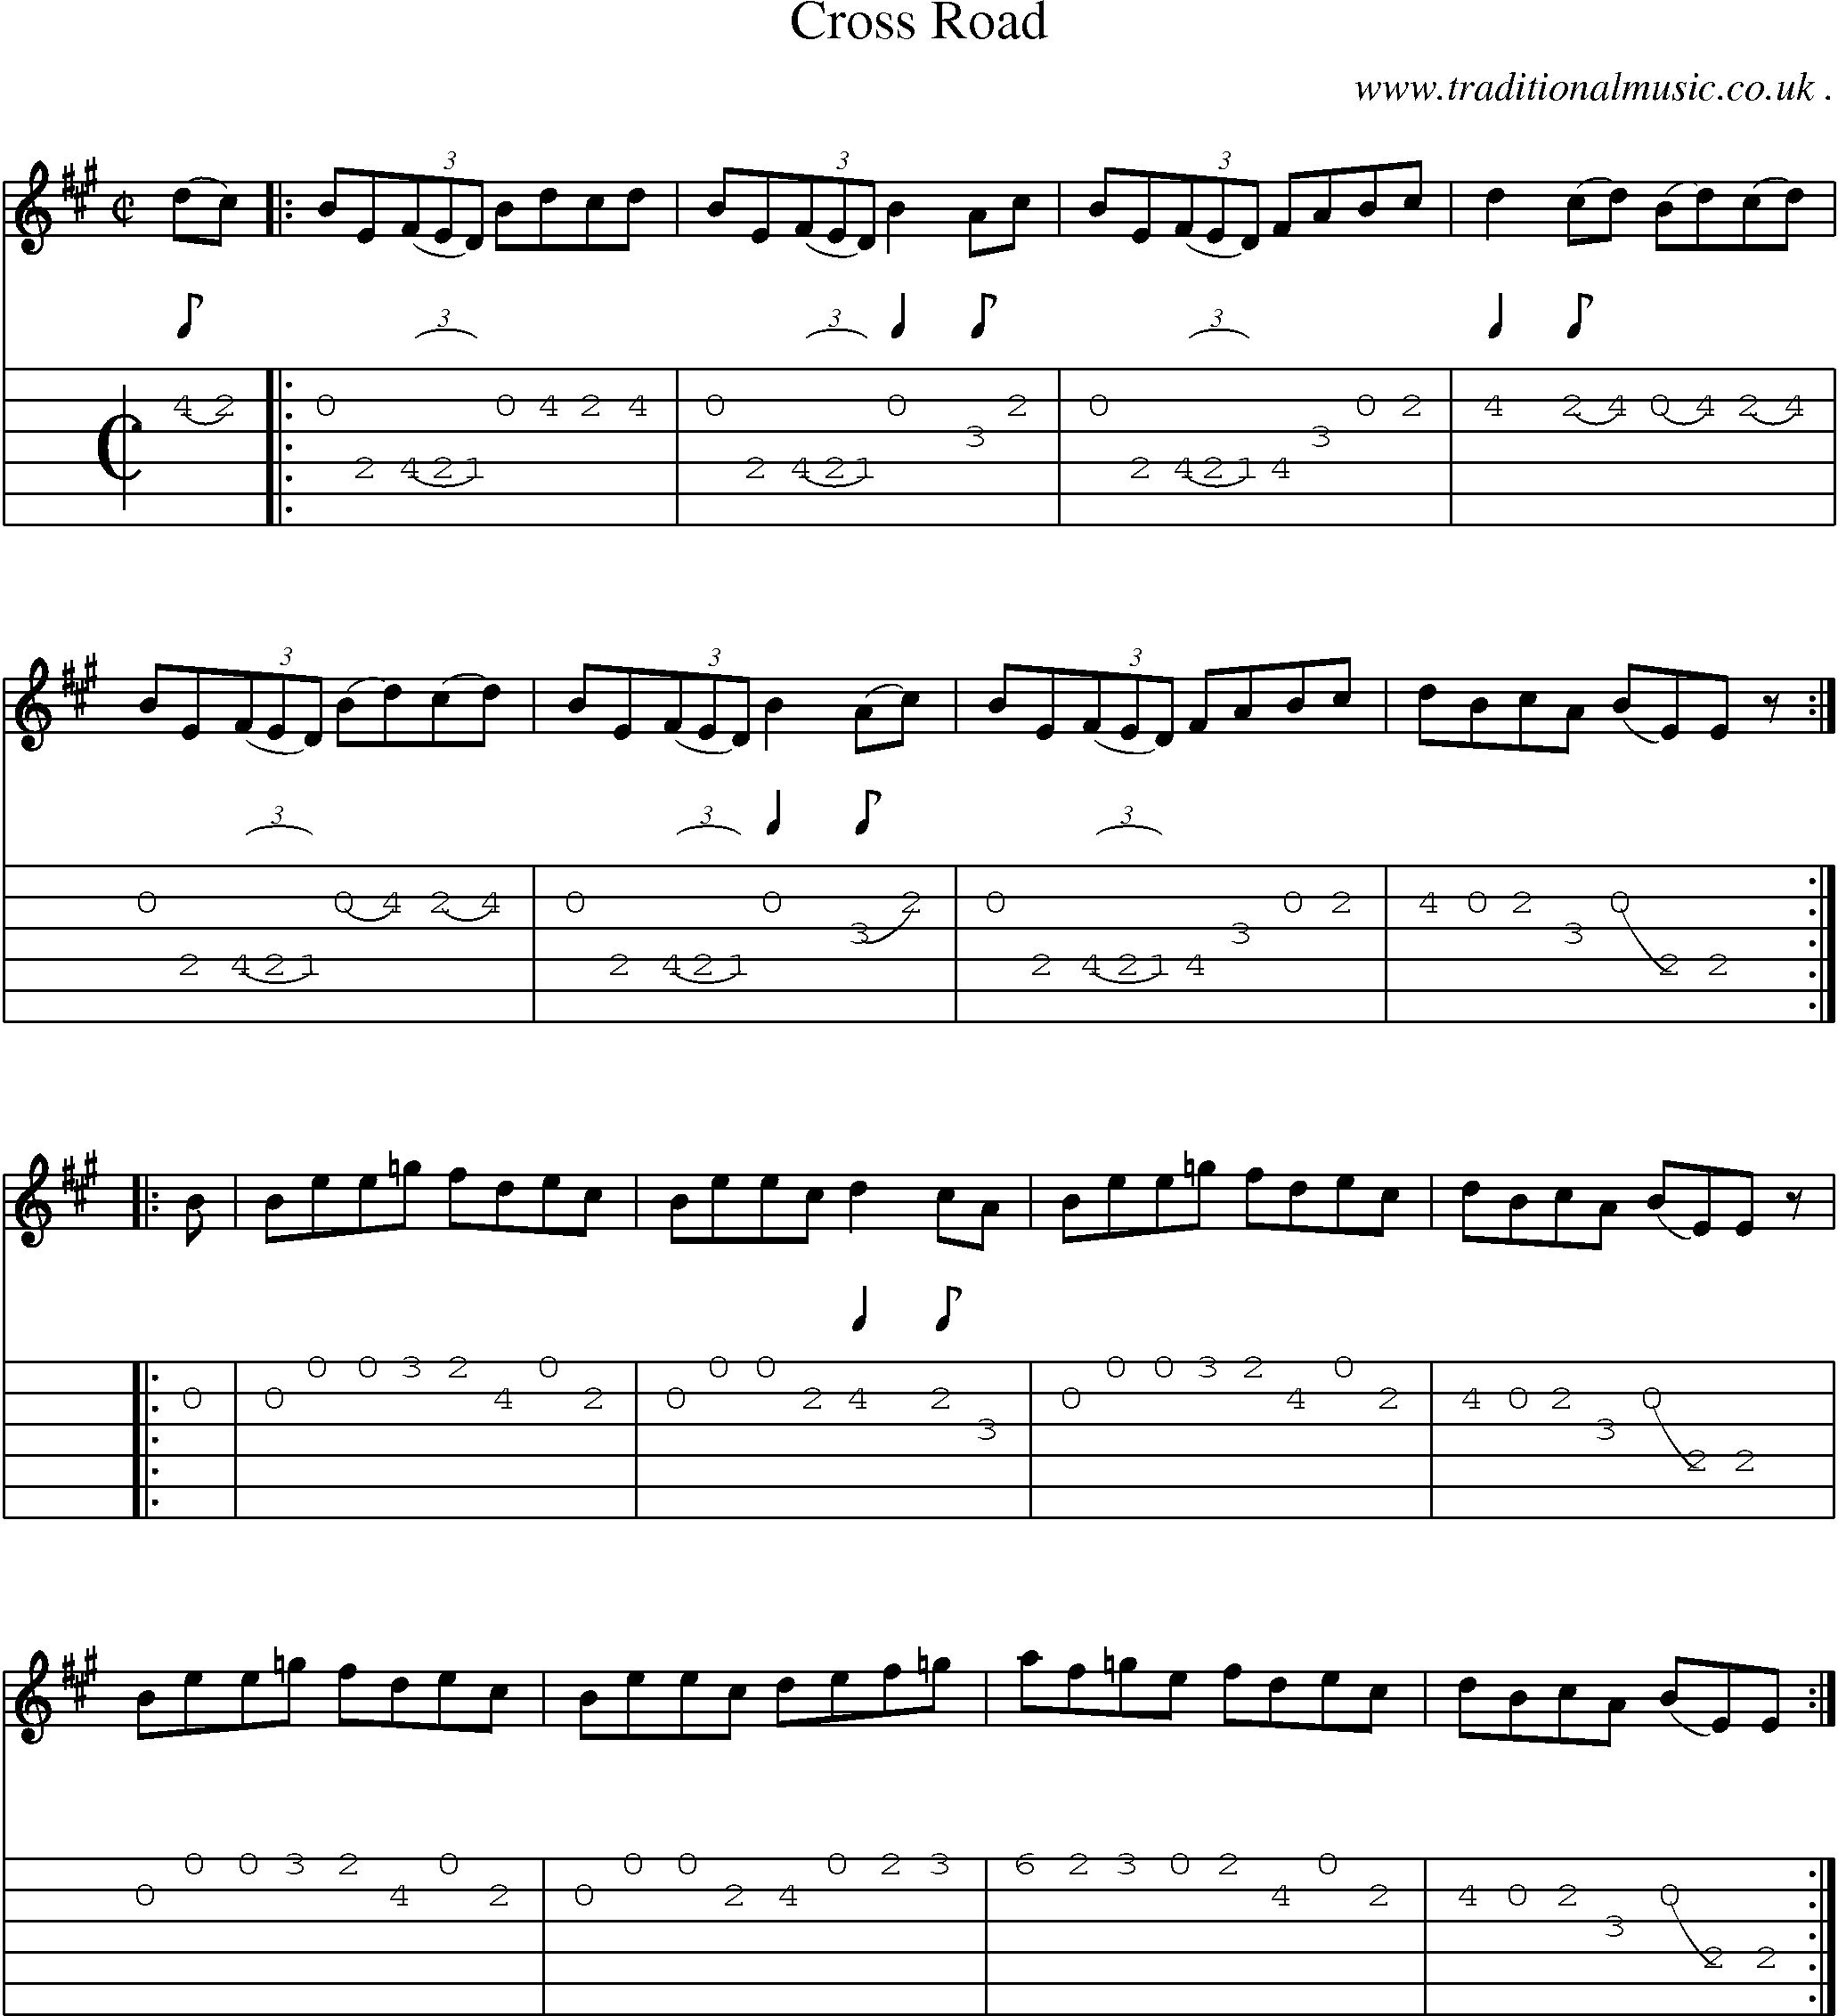 Sheet-Music and Guitar Tabs for Cross Road